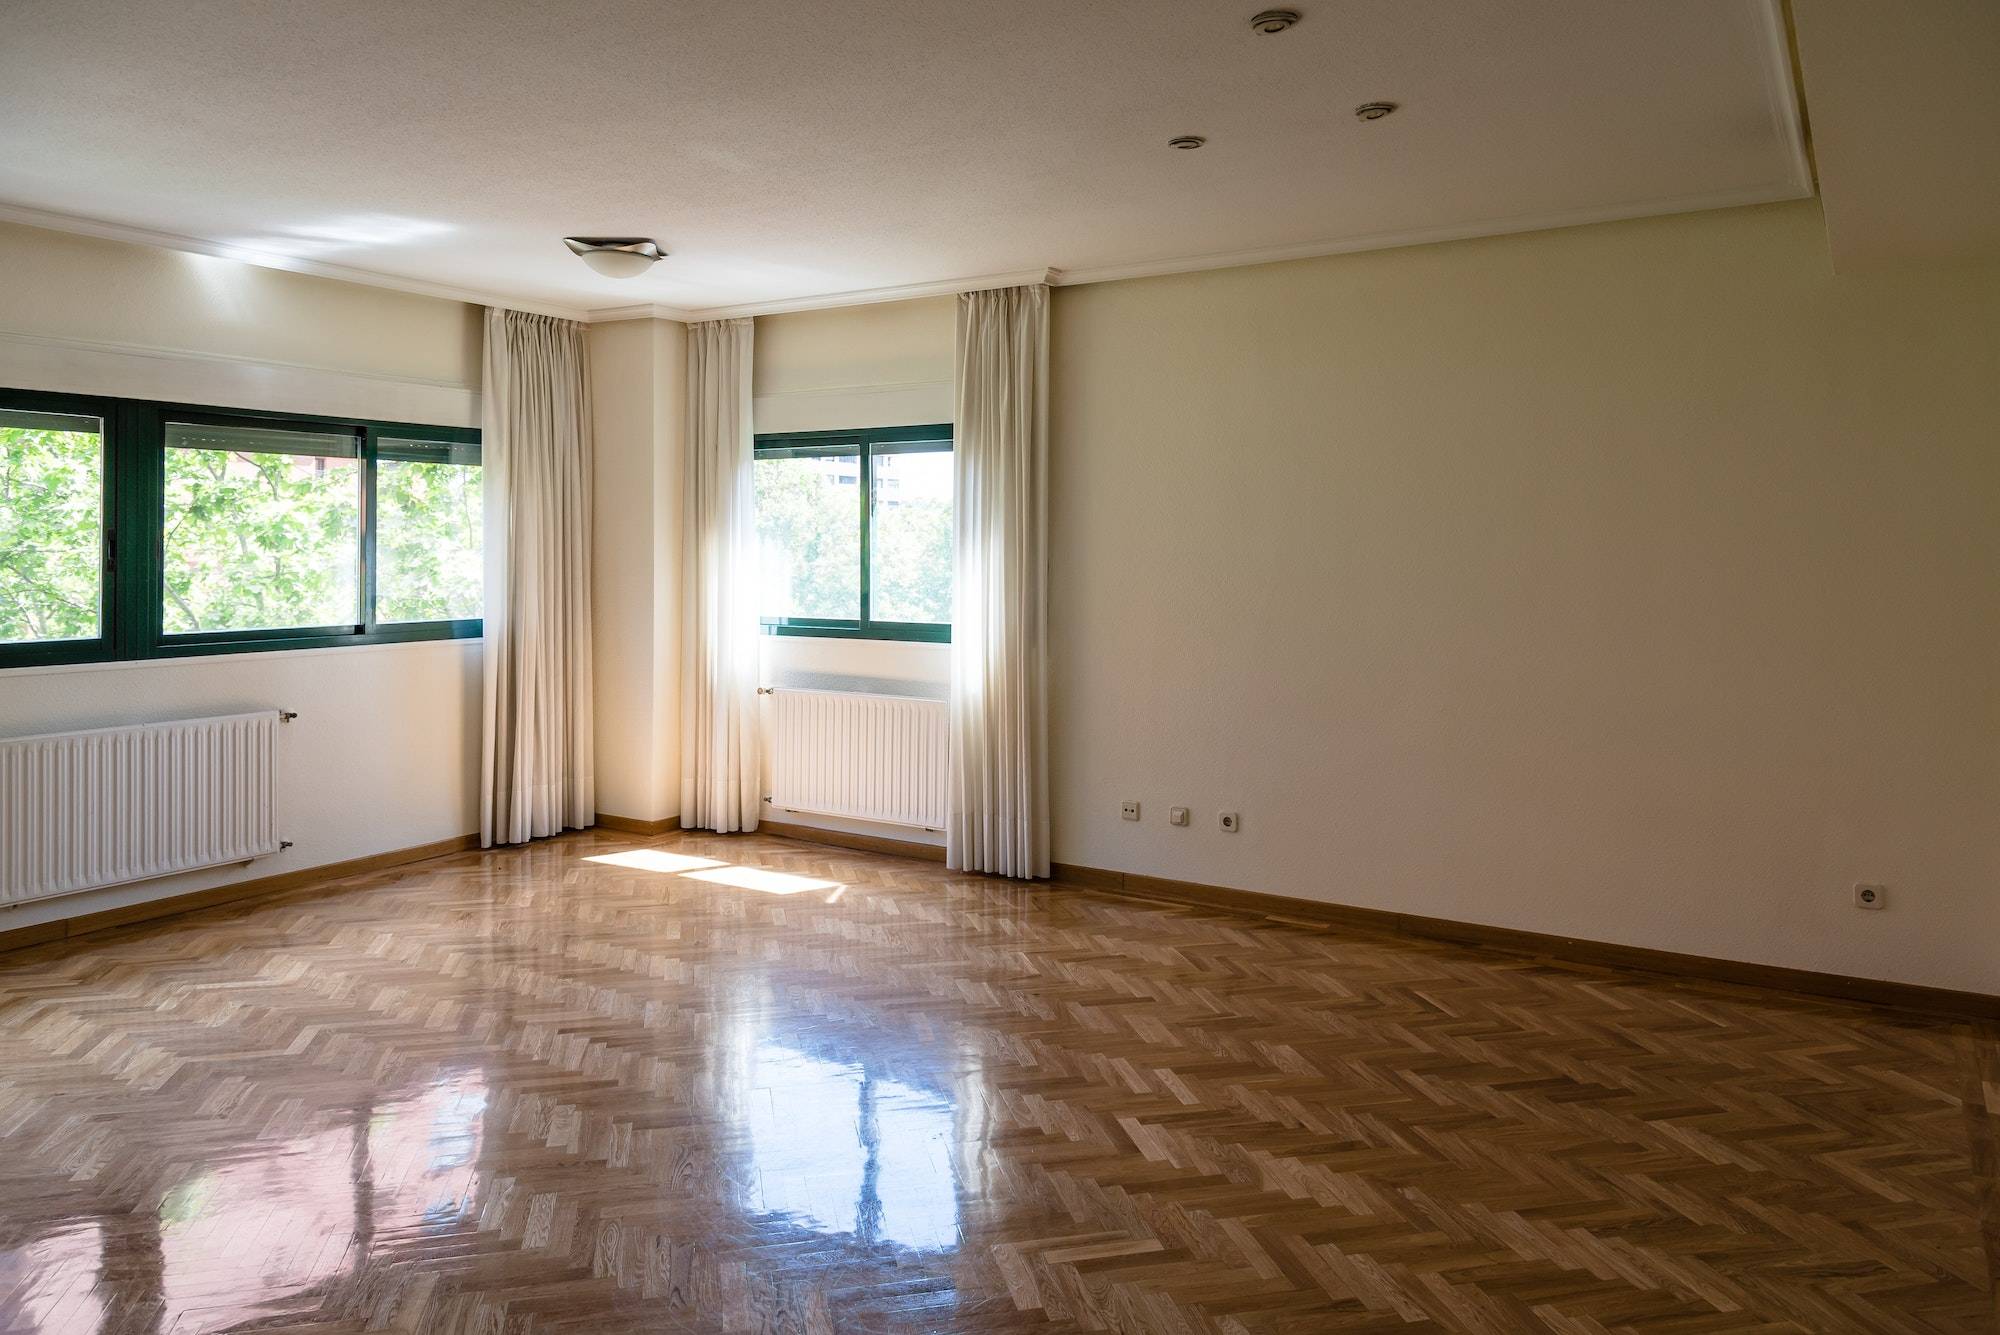 Interior view of empty house for sale